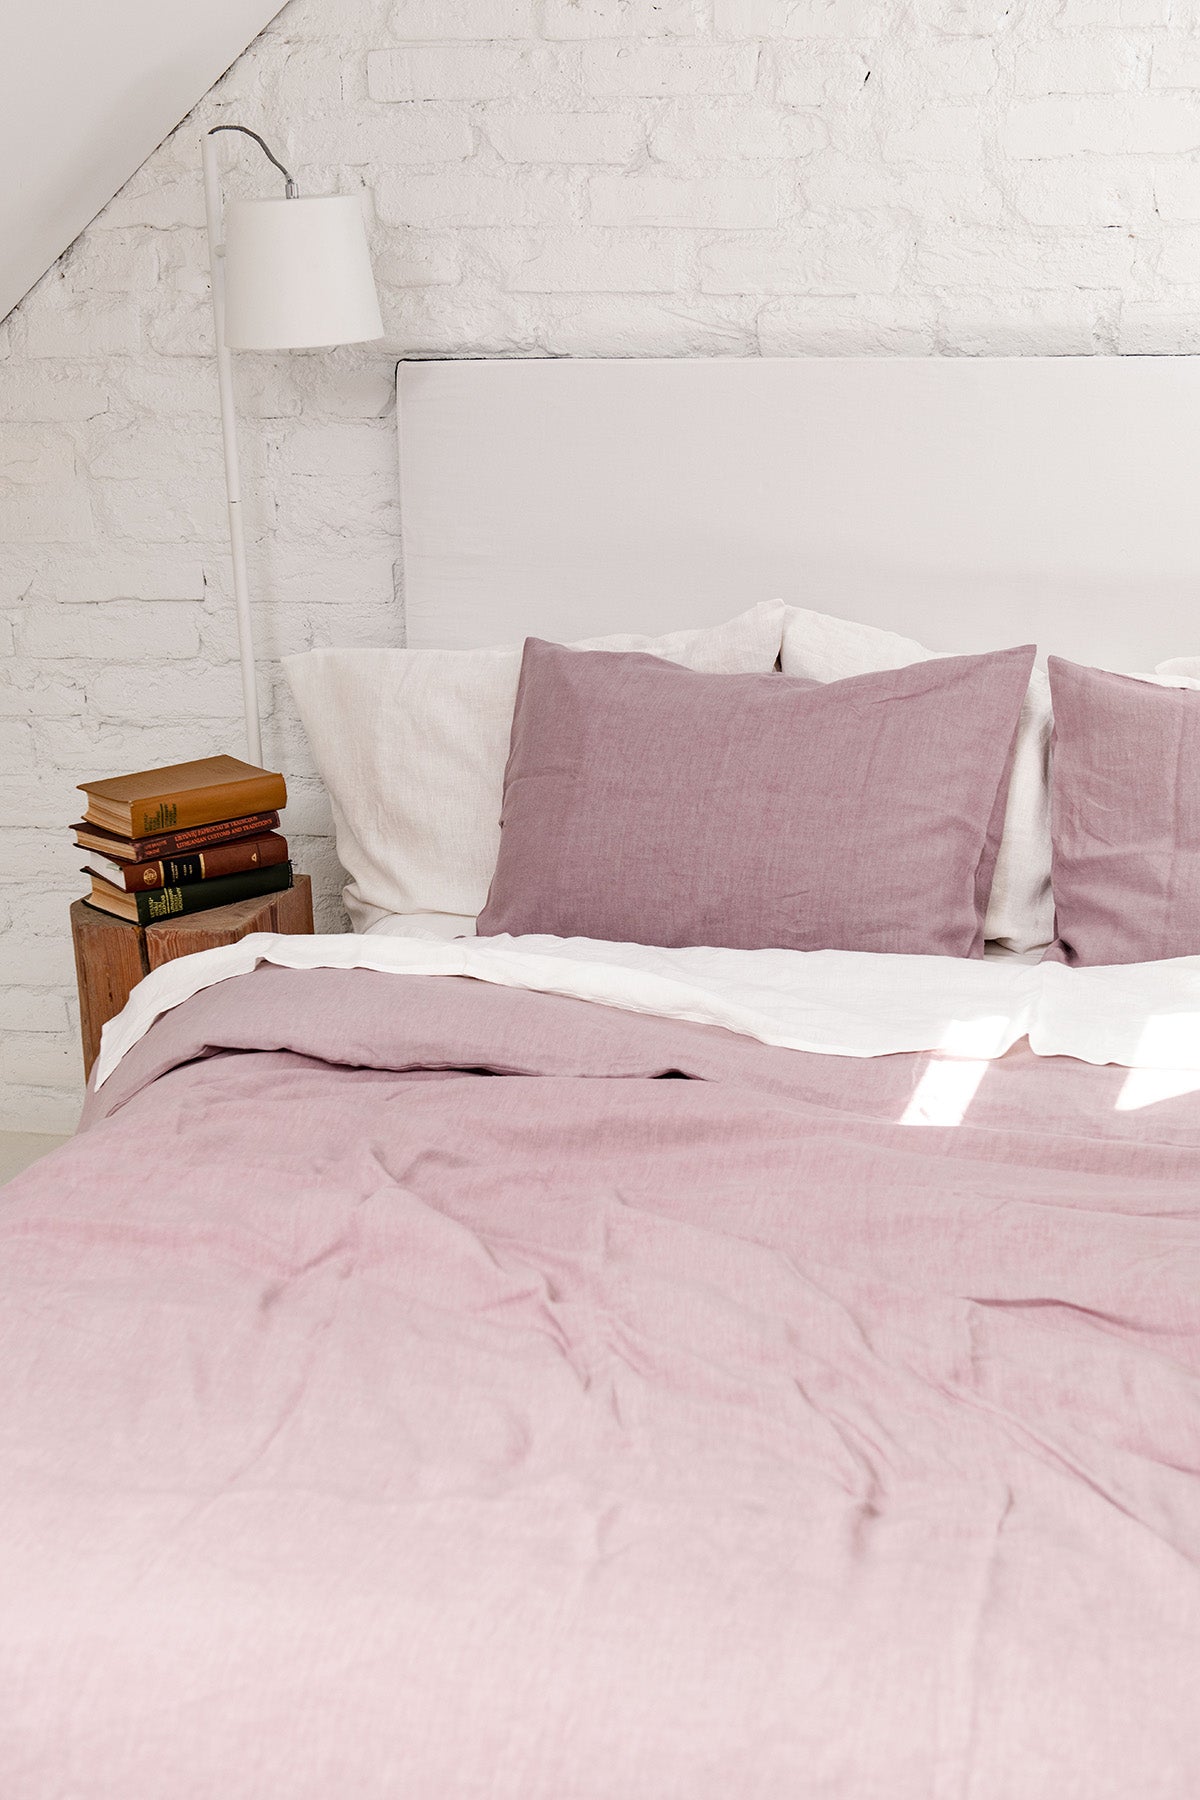 Dusty Rose LInen Pillowcase With Sheets By AmourlInen